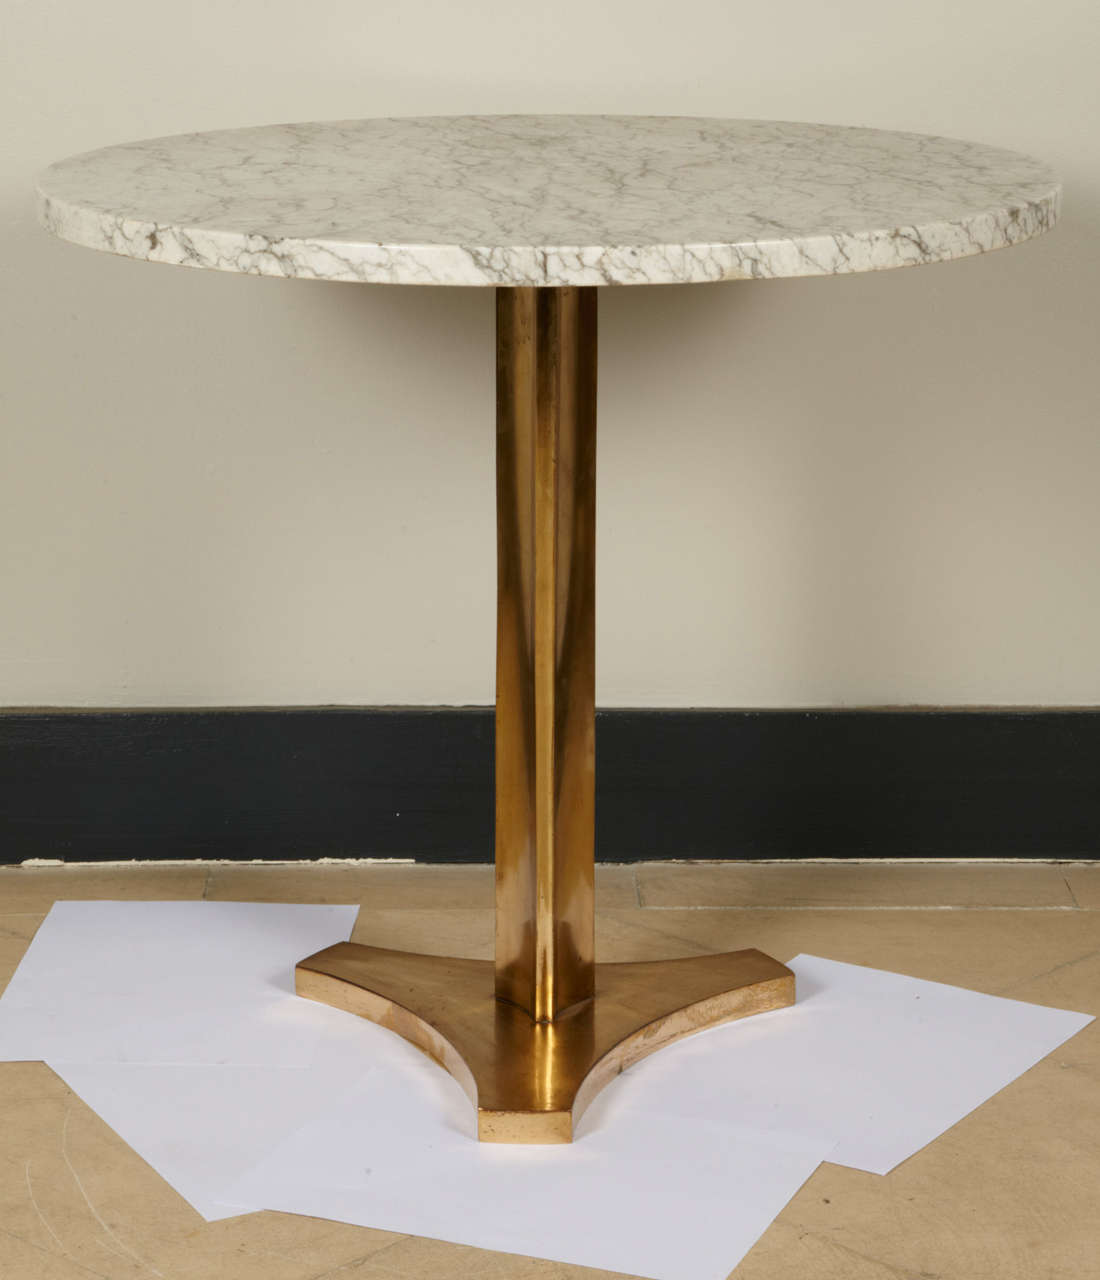 Elegant gueridon , bronze base and top marble.
Néo-classic , Marc Du Plantier style
Quality made.